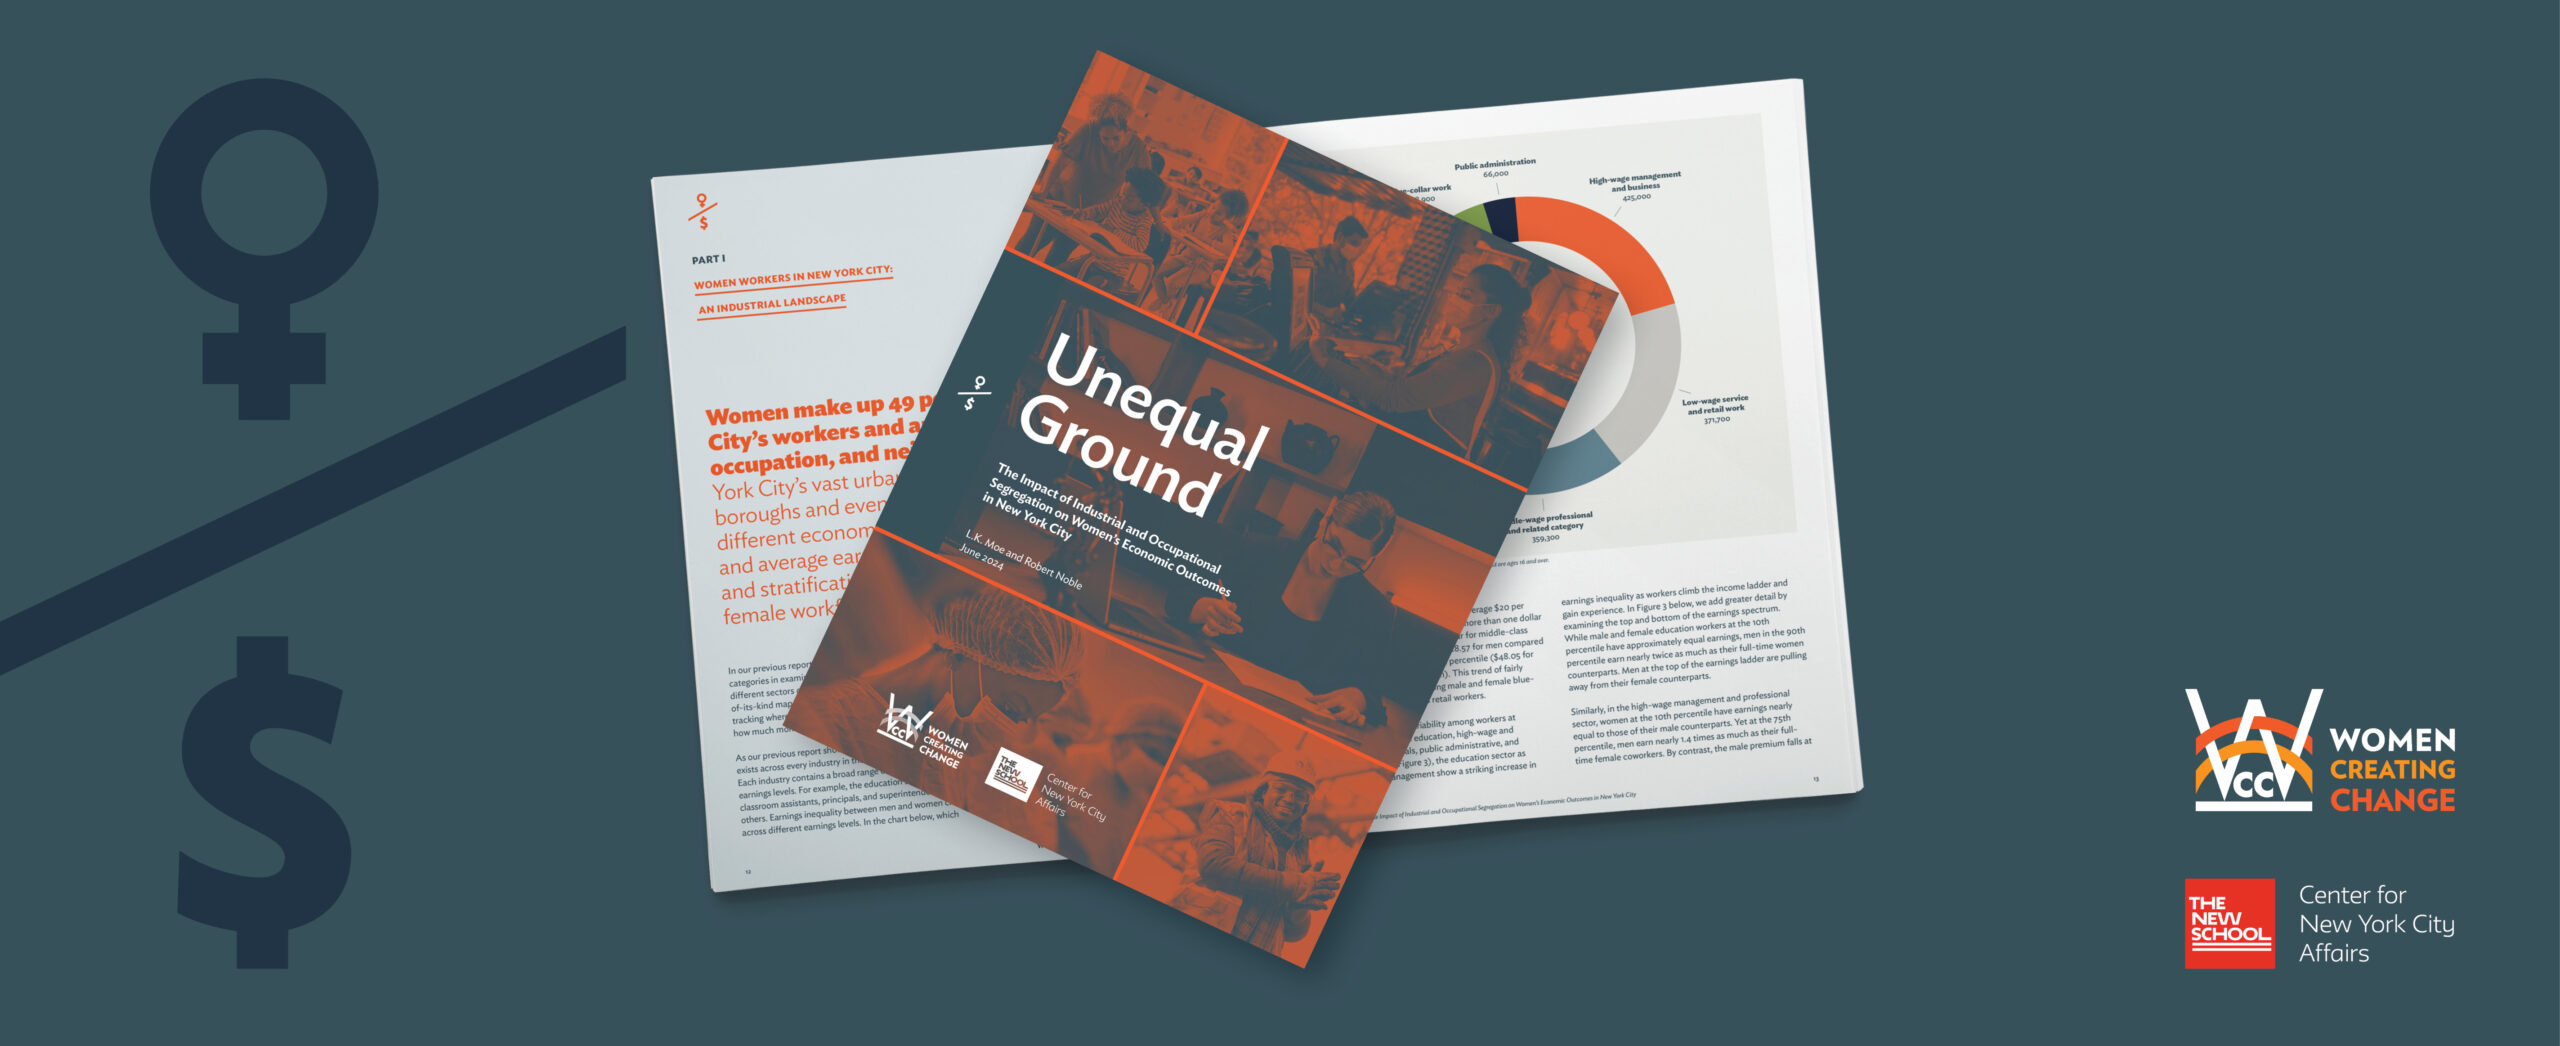 Read WCC's New Report: Unequal Ground | Learn more about factors that lead to gender pay disparity and recommendations to resolve inequity.